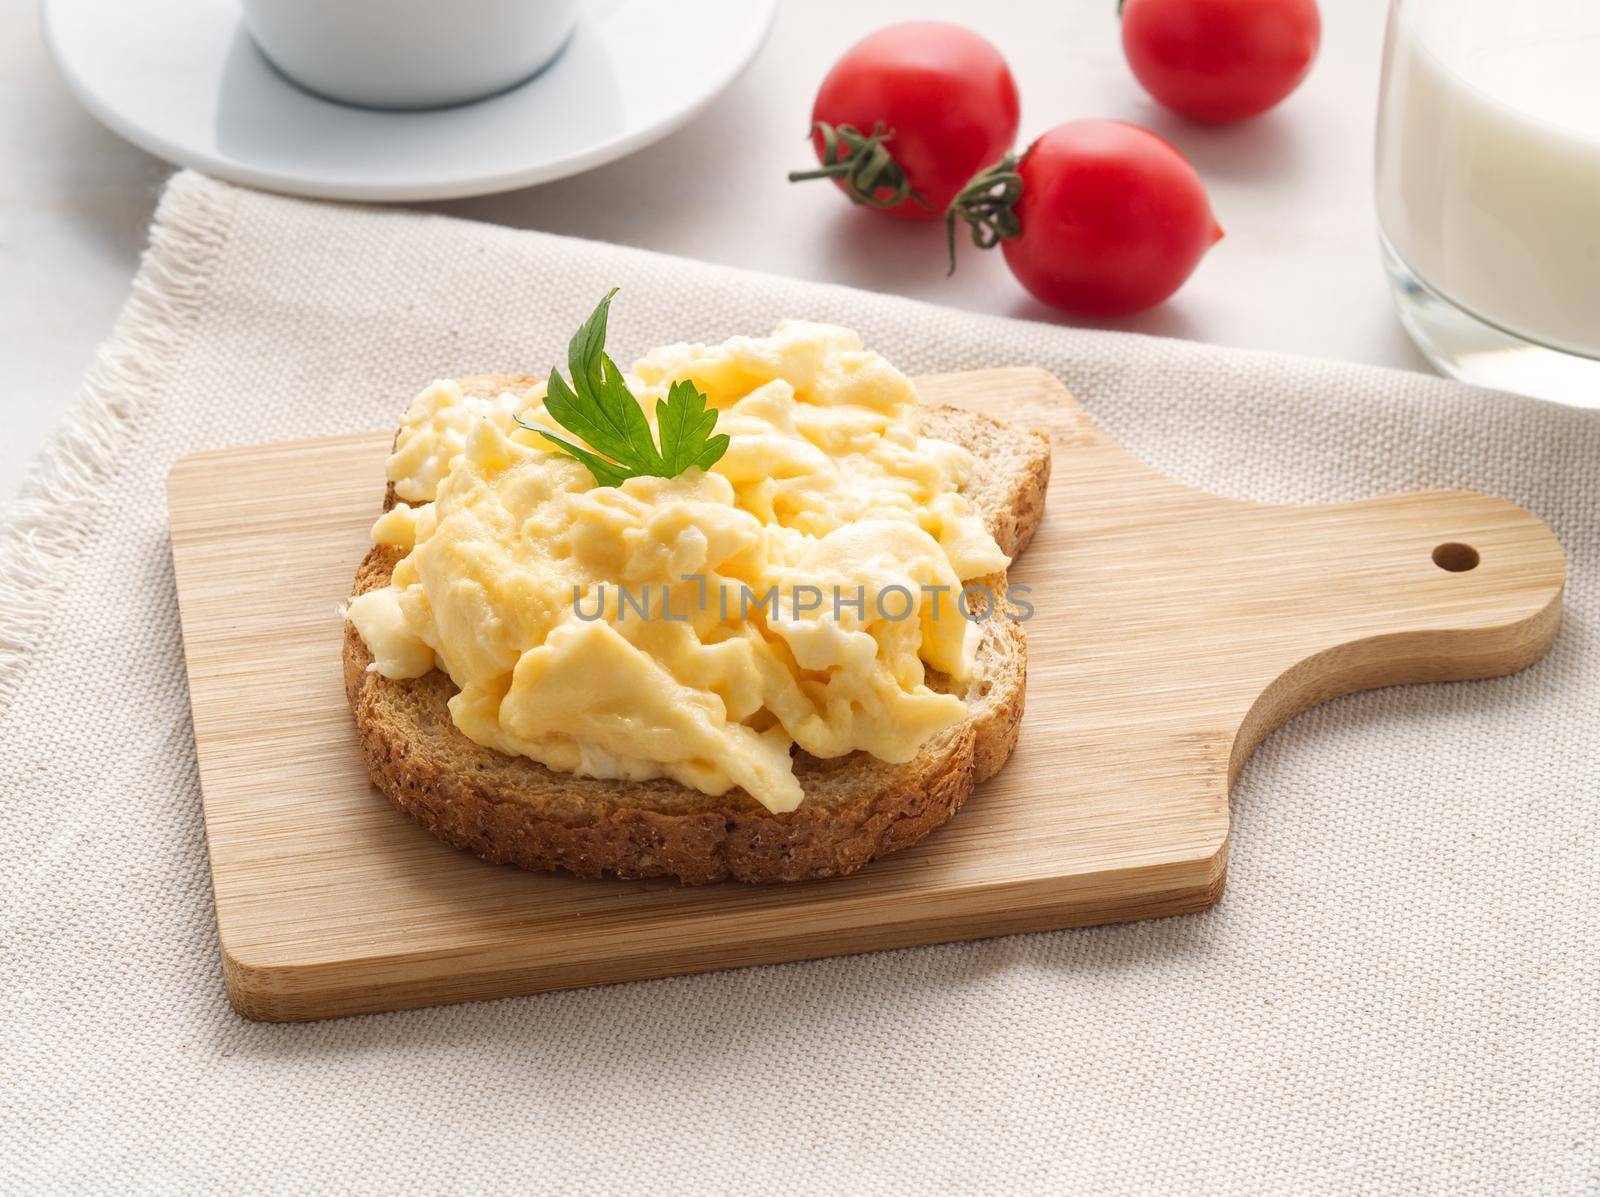 Sandwich with pan-fried scrambled eggs on a wooden cutting board, side view.